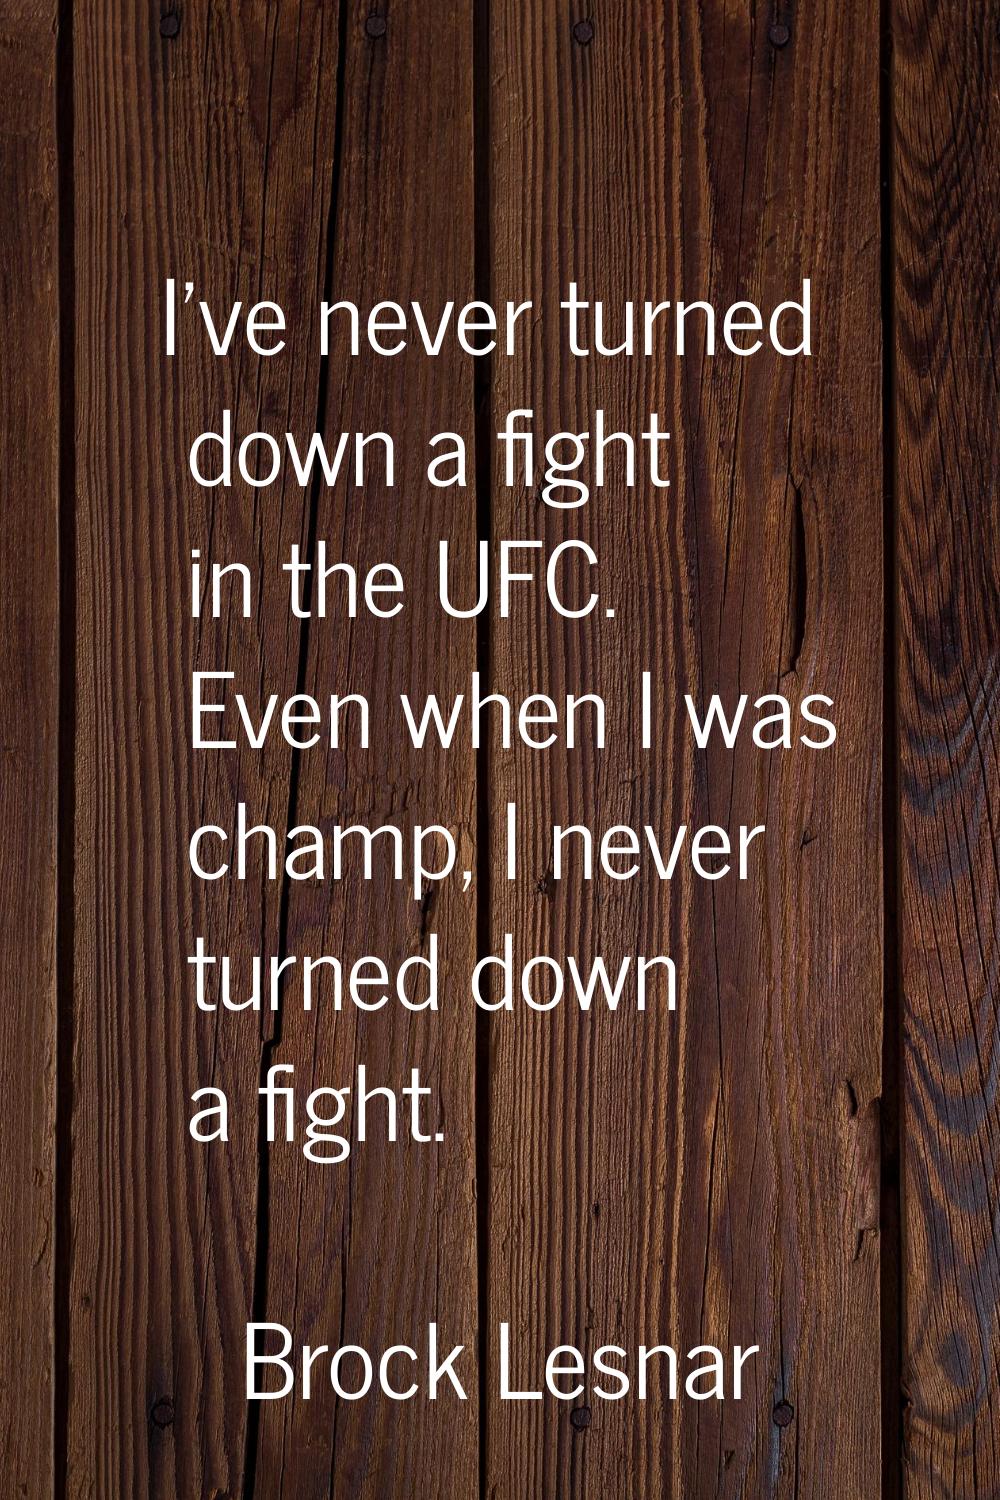 I've never turned down a fight in the UFC. Even when I was champ, I never turned down a fight.